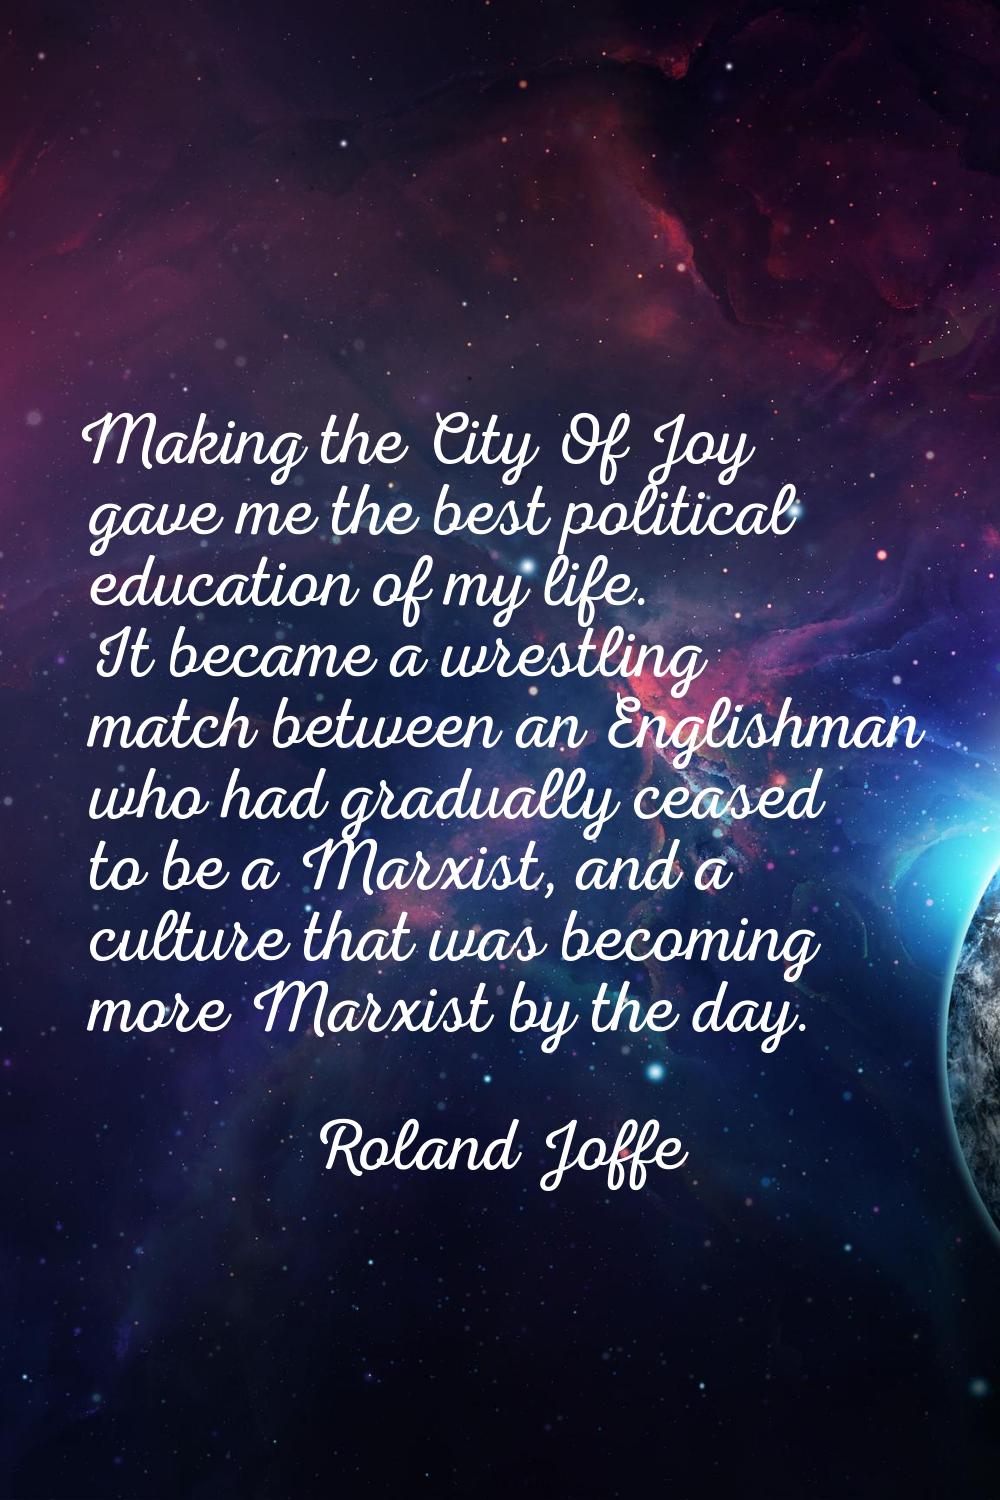 Making the City Of Joy gave me the best political education of my life. It became a wrestling match